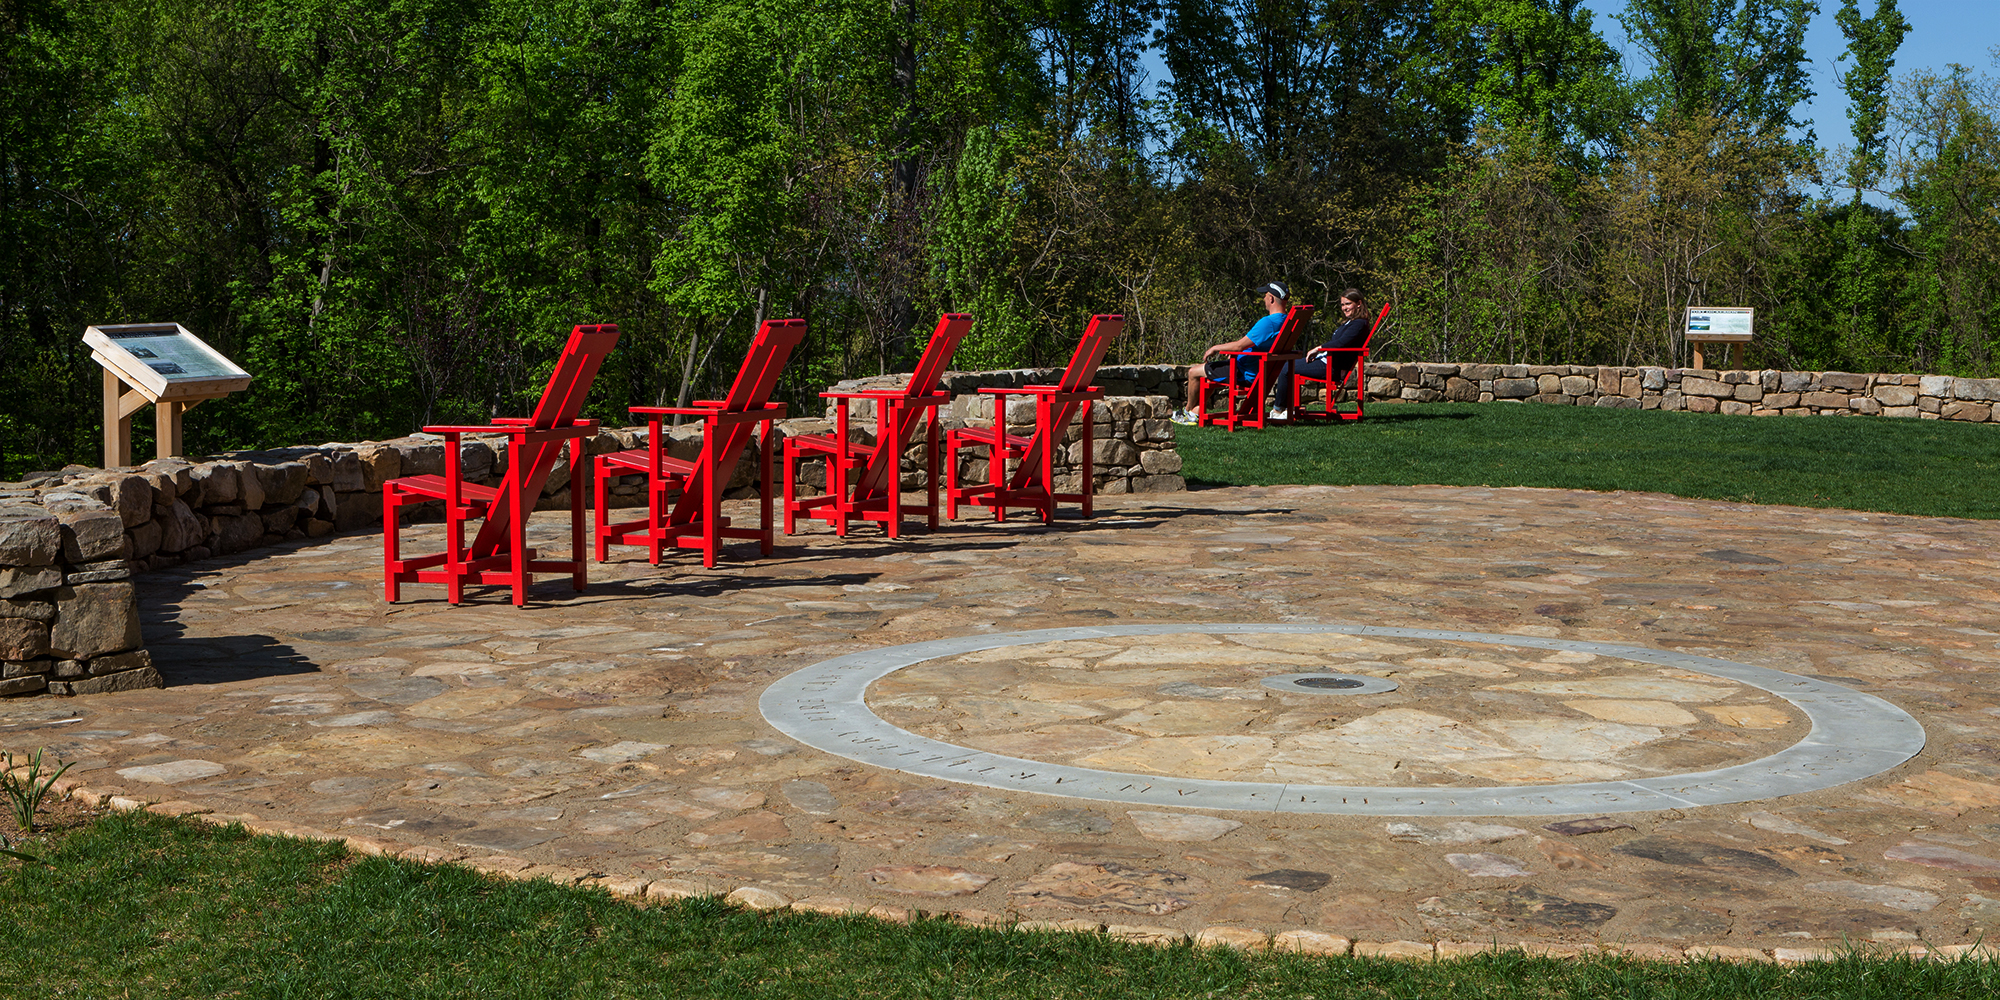 Seating area with red lawn chairs at High Ground Park